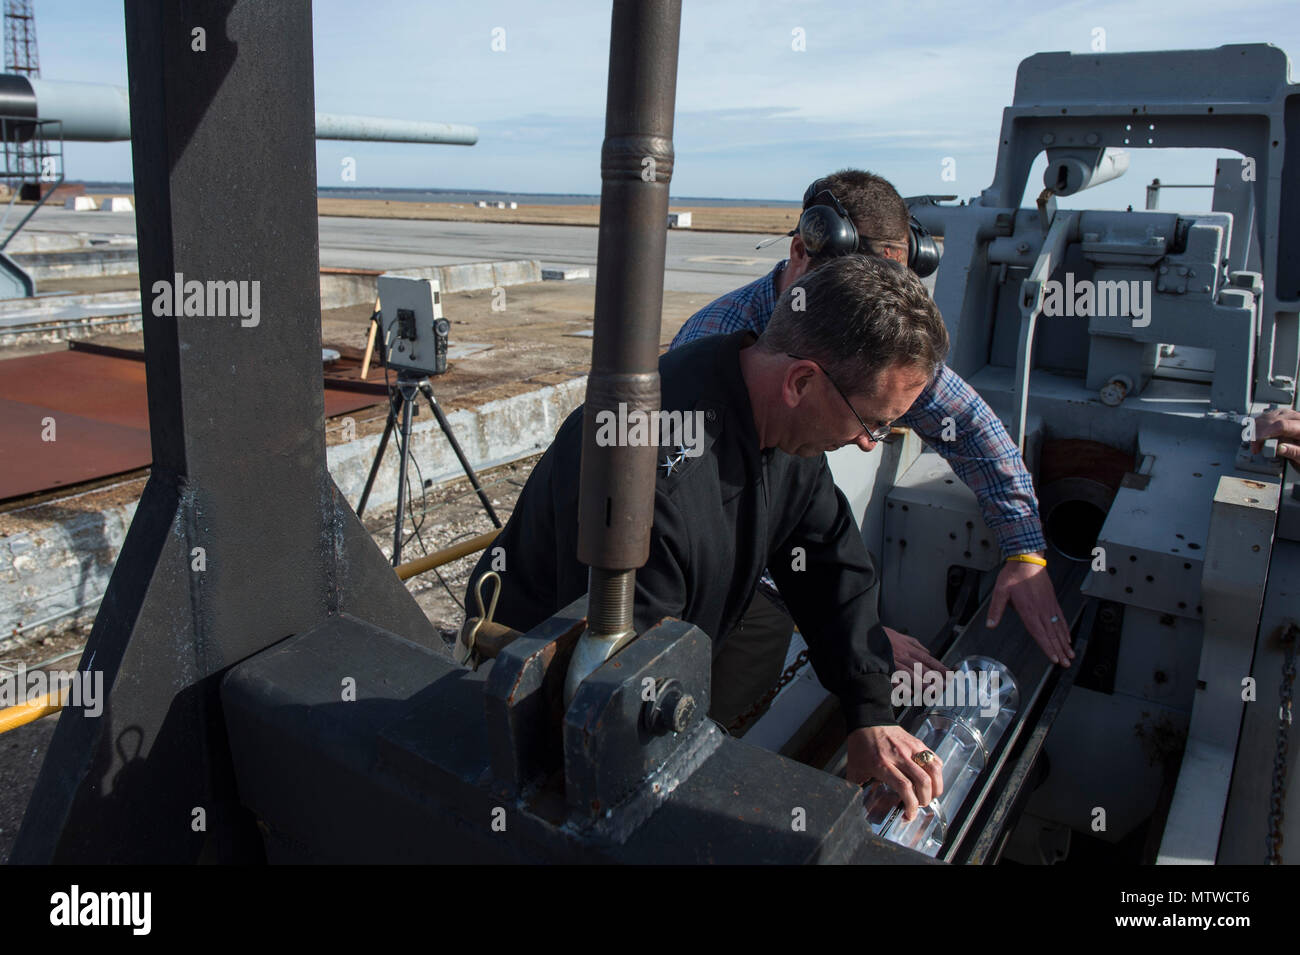 170112-N-PO203-226 DAHLGREN (Jan. 12, 2017) Rear Adm. David Hahn, chief of naval research, assists with loading a Hyper Velocity Projectile (HVP) into a traditional powder gun during a visit to the Naval Surface Warfare Center, Dahlgren Division. The HVP is a next-generation, low drag, guided projectile capable of completing multiple missions for gun systems such as the Navy five-Inch guns and future railguns. (U.S. Navy photo by John F. Williams/Released) Stock Photo